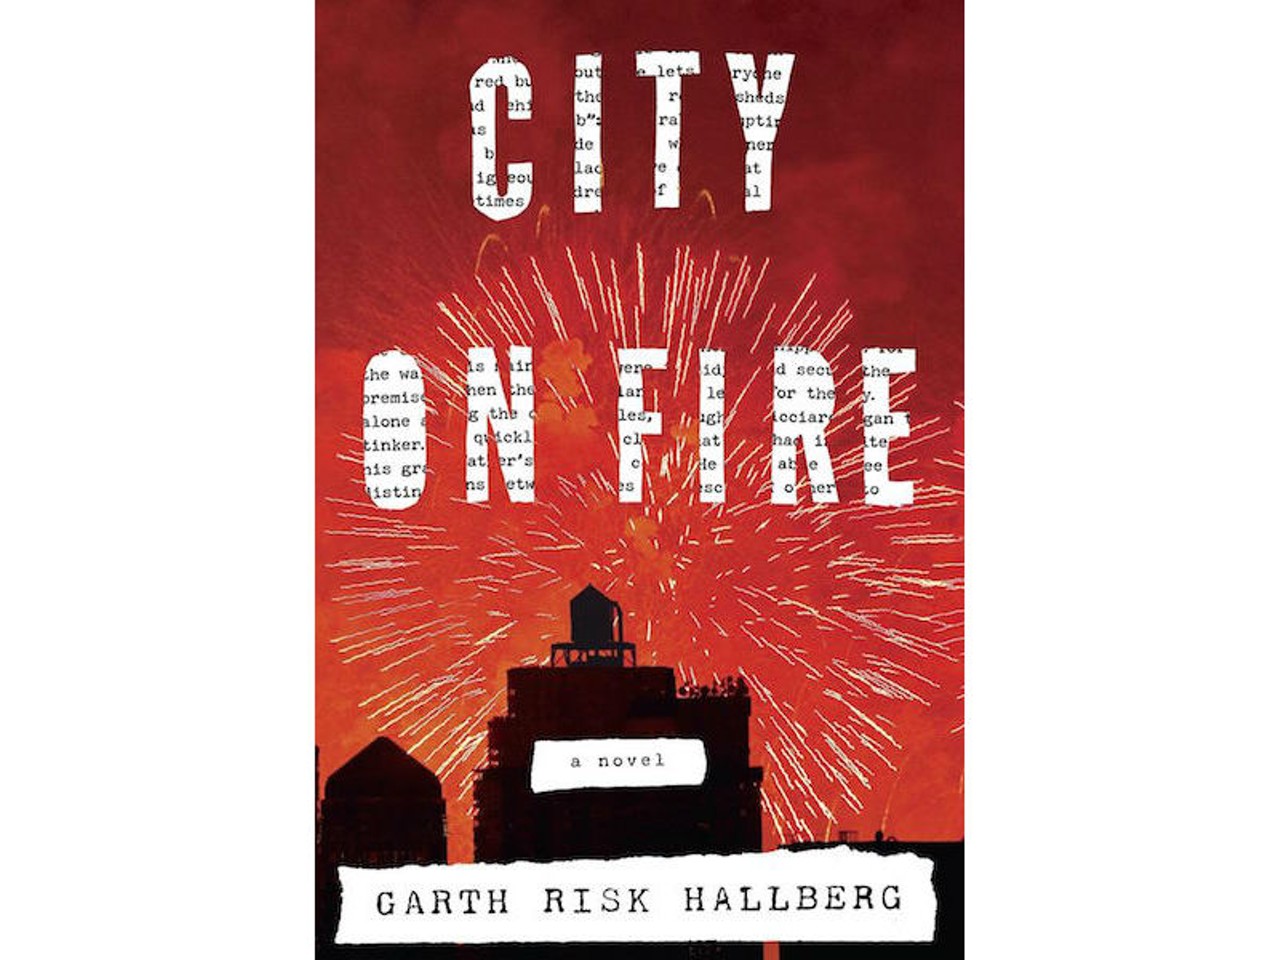 City on Fire, a novel by Garth Risk Hallberg (Knopf, 944 pages)
An extravagant doorstop of a novel limning the 1977 New York City blackout, perhaps its reach exceeds its grasp. But Hallberg's vision &#150; and it is a feat of vision; he wasn't born yet when the events he relates took place &#150; carries the reader along on a wave of word-drunkenness that's difficult to resist. &#151;JBY